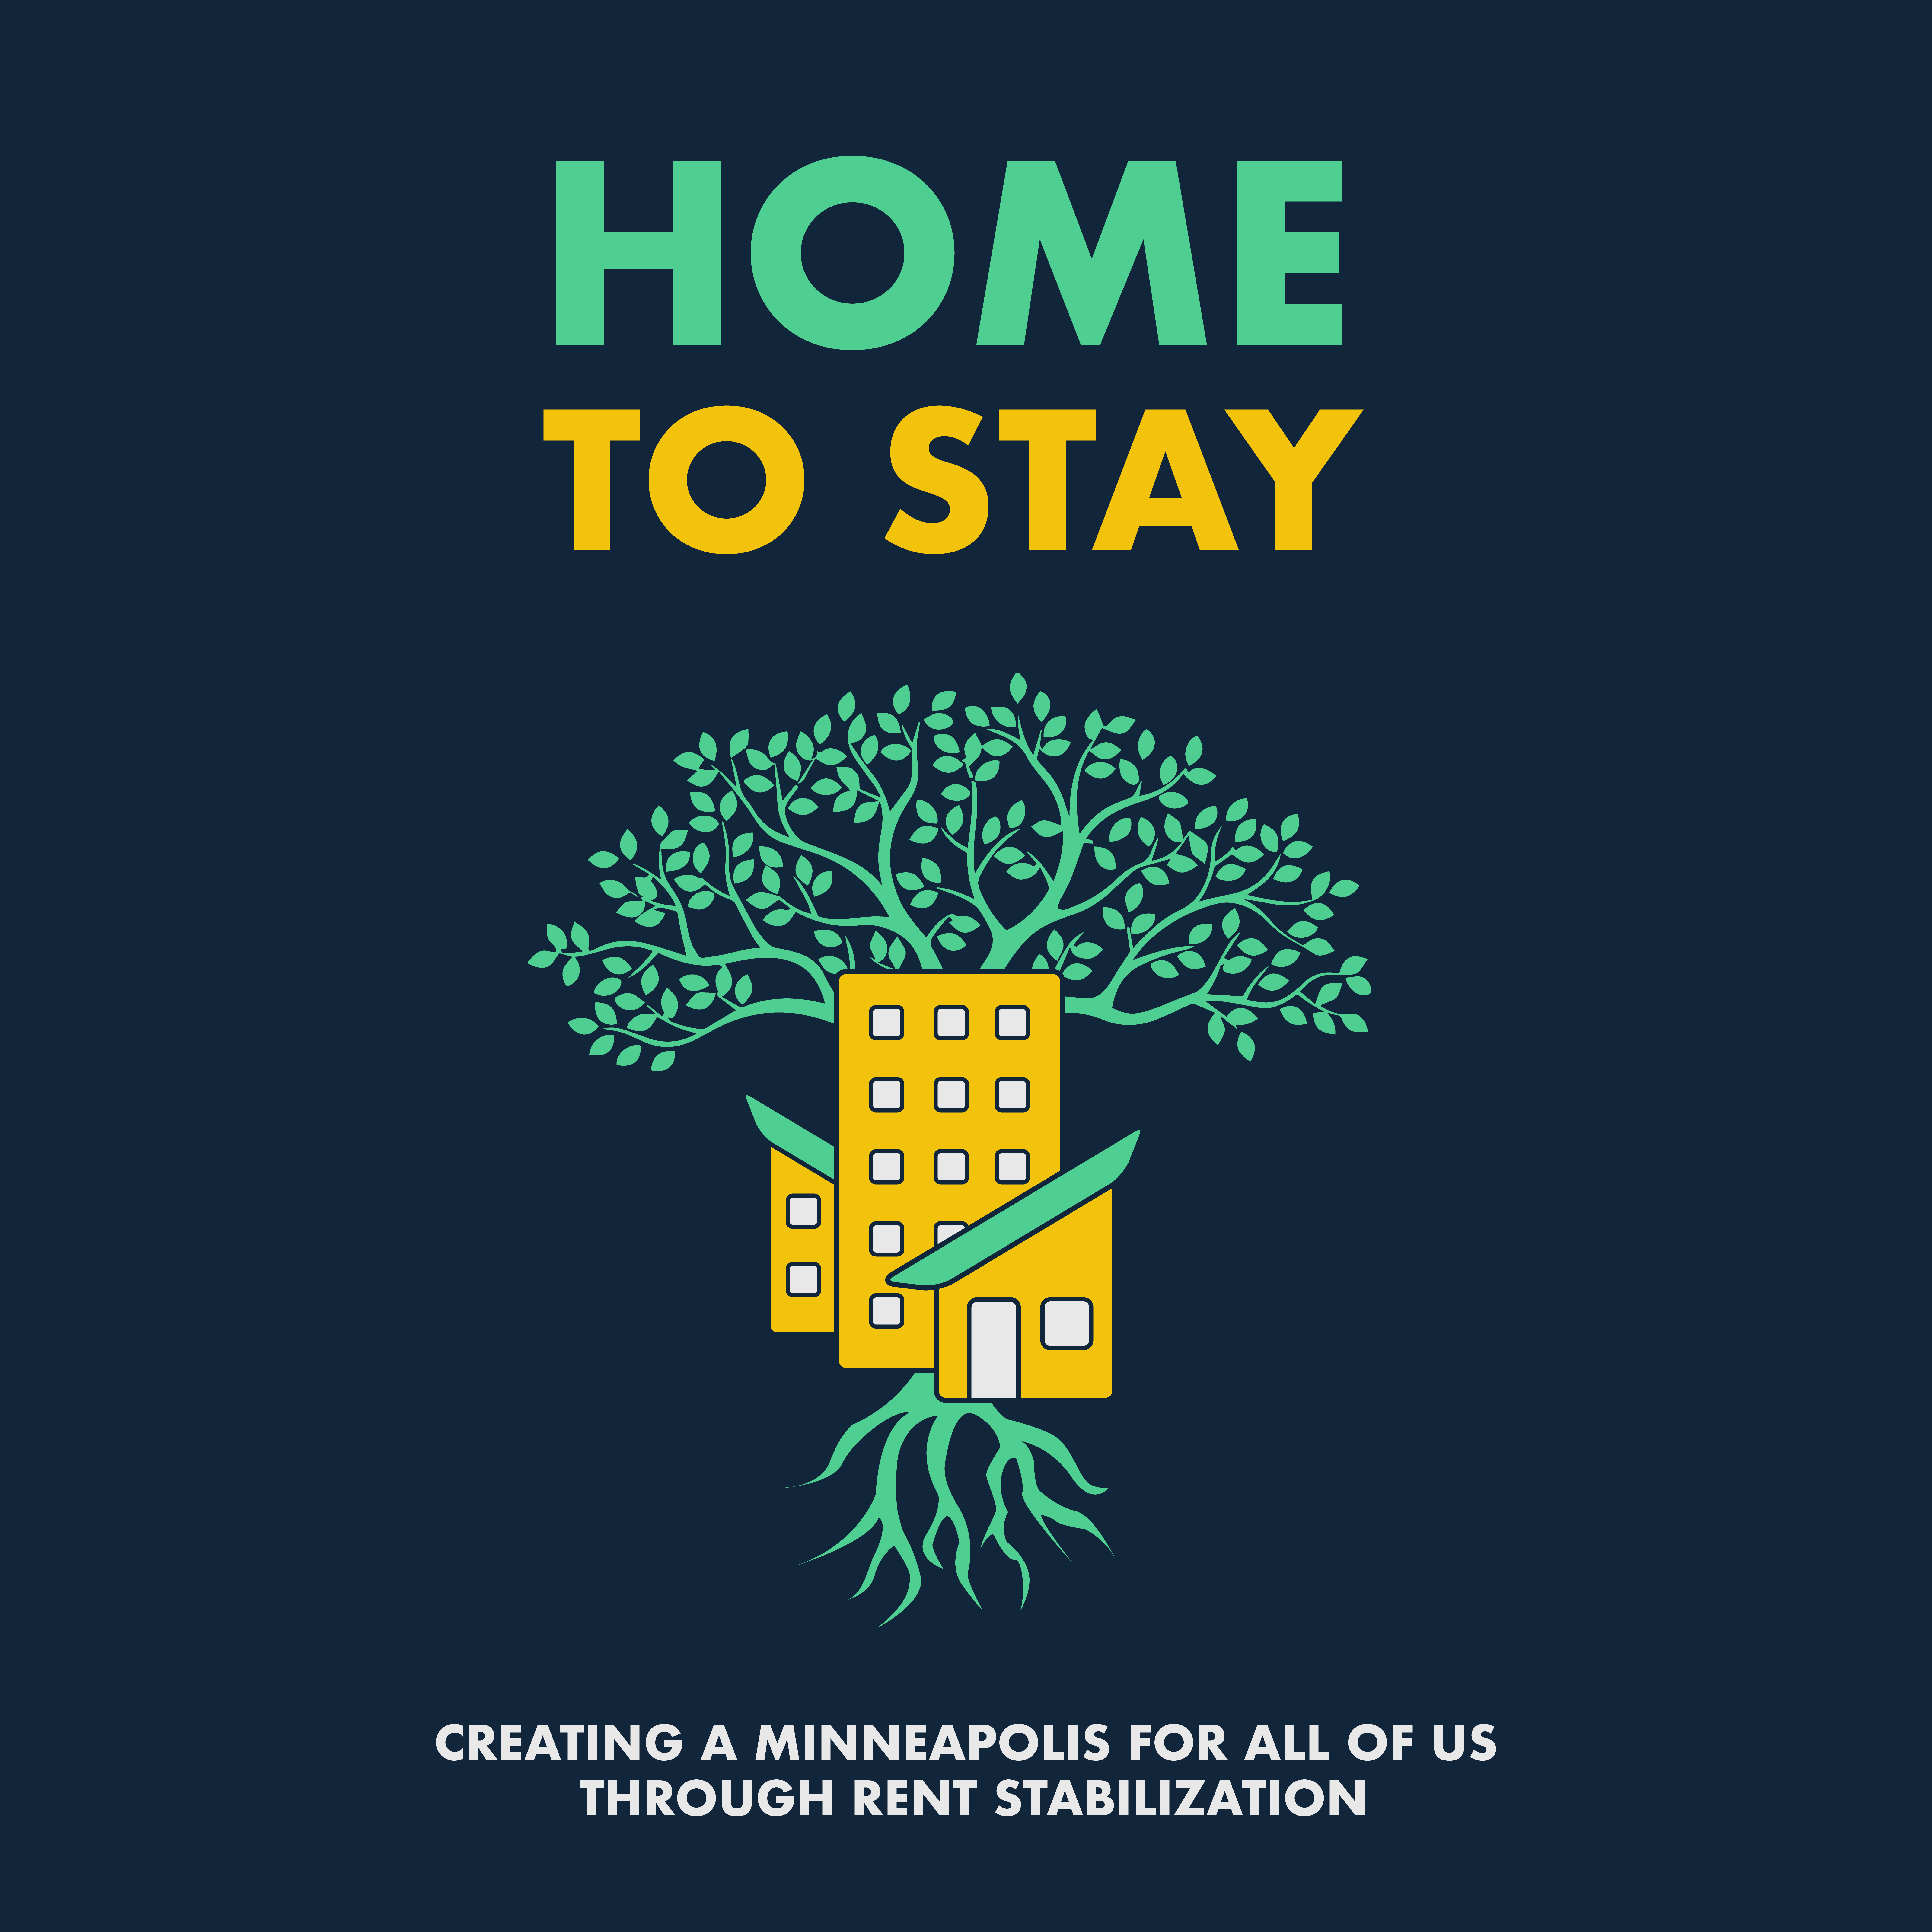 Home To Stay - Creating a Minneapolis for all of us through rent stabilization